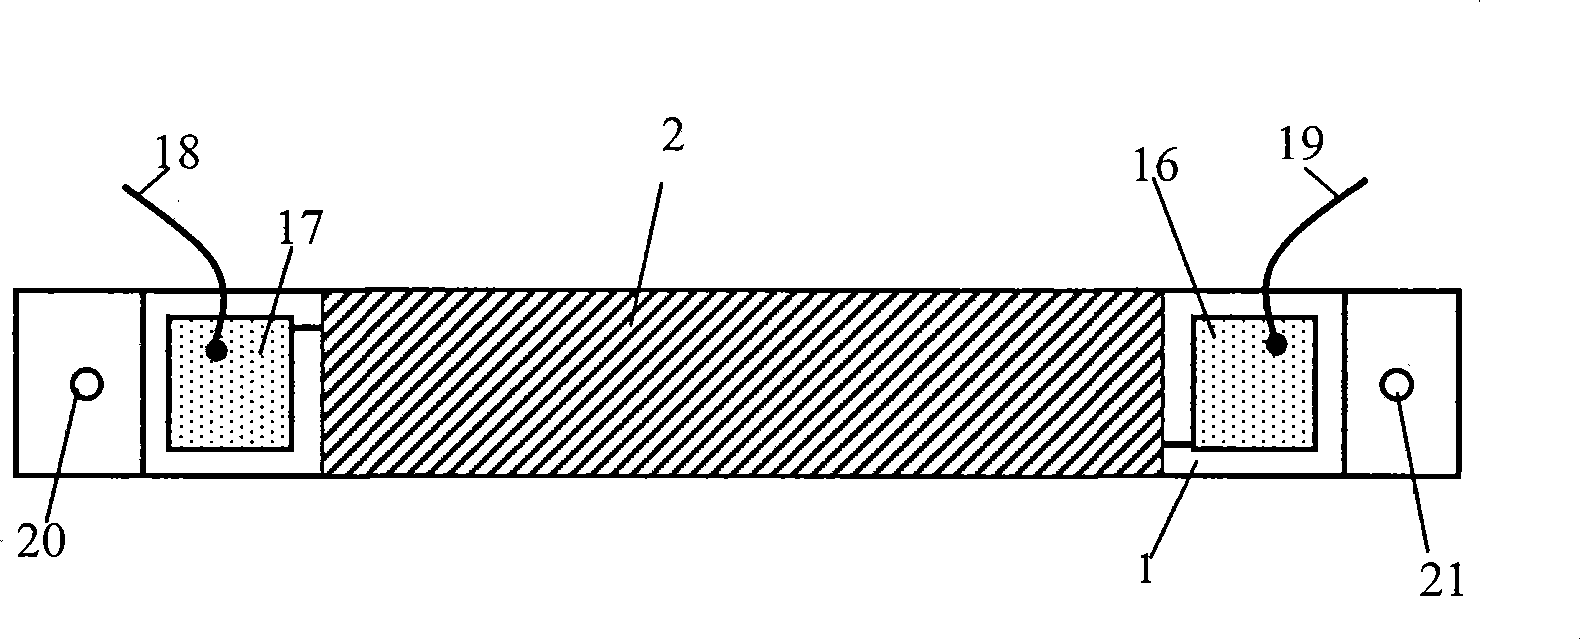 Radiation detector based on flat plate substrate